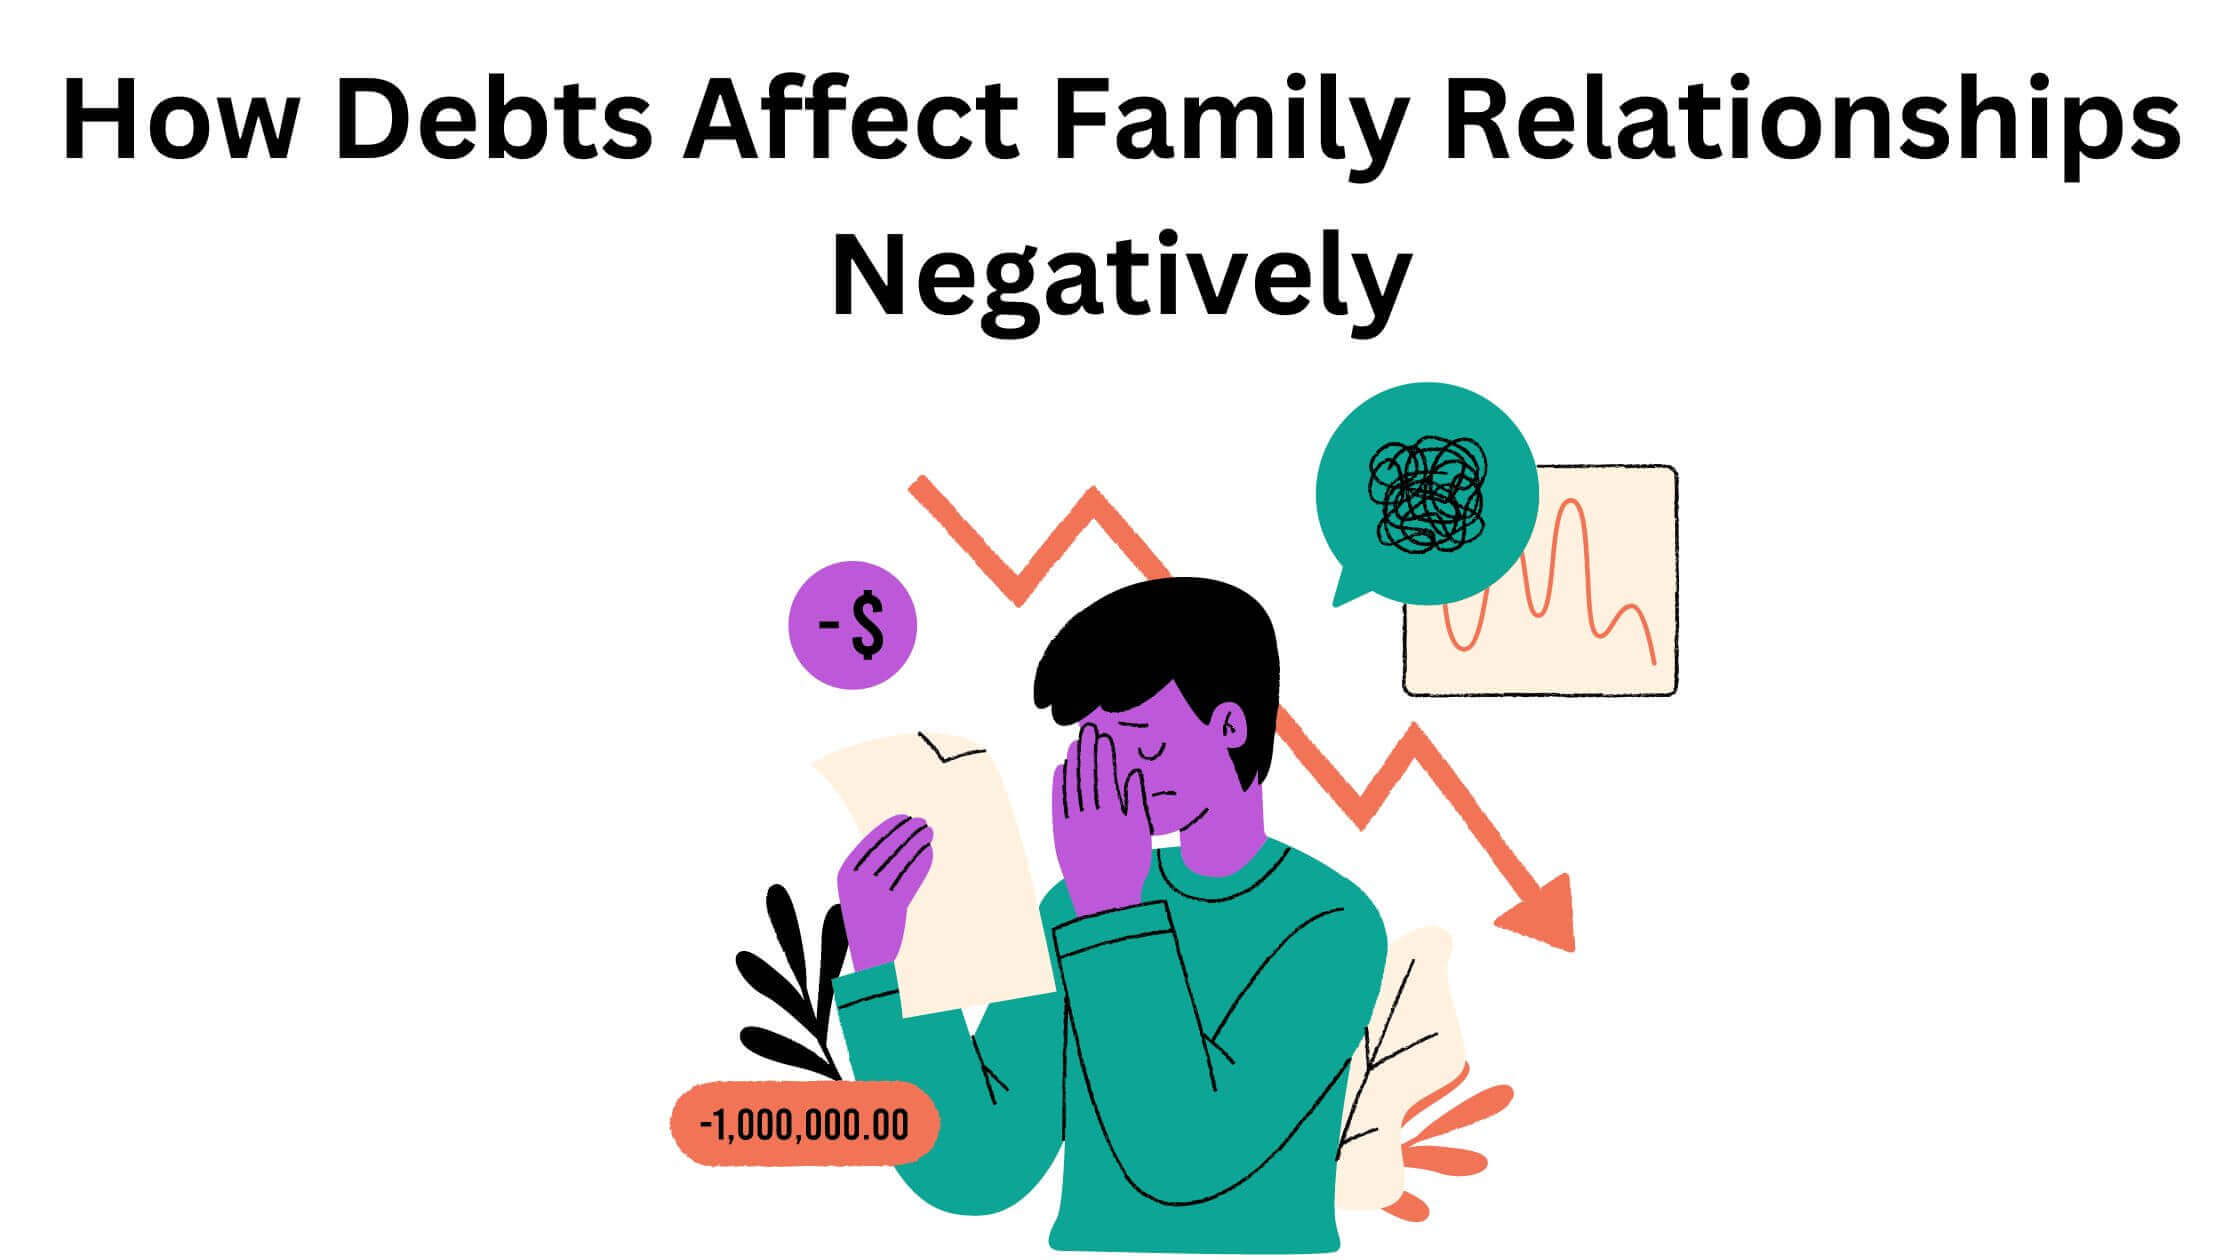 what are the 15 ways debts affect family relationships negatively?